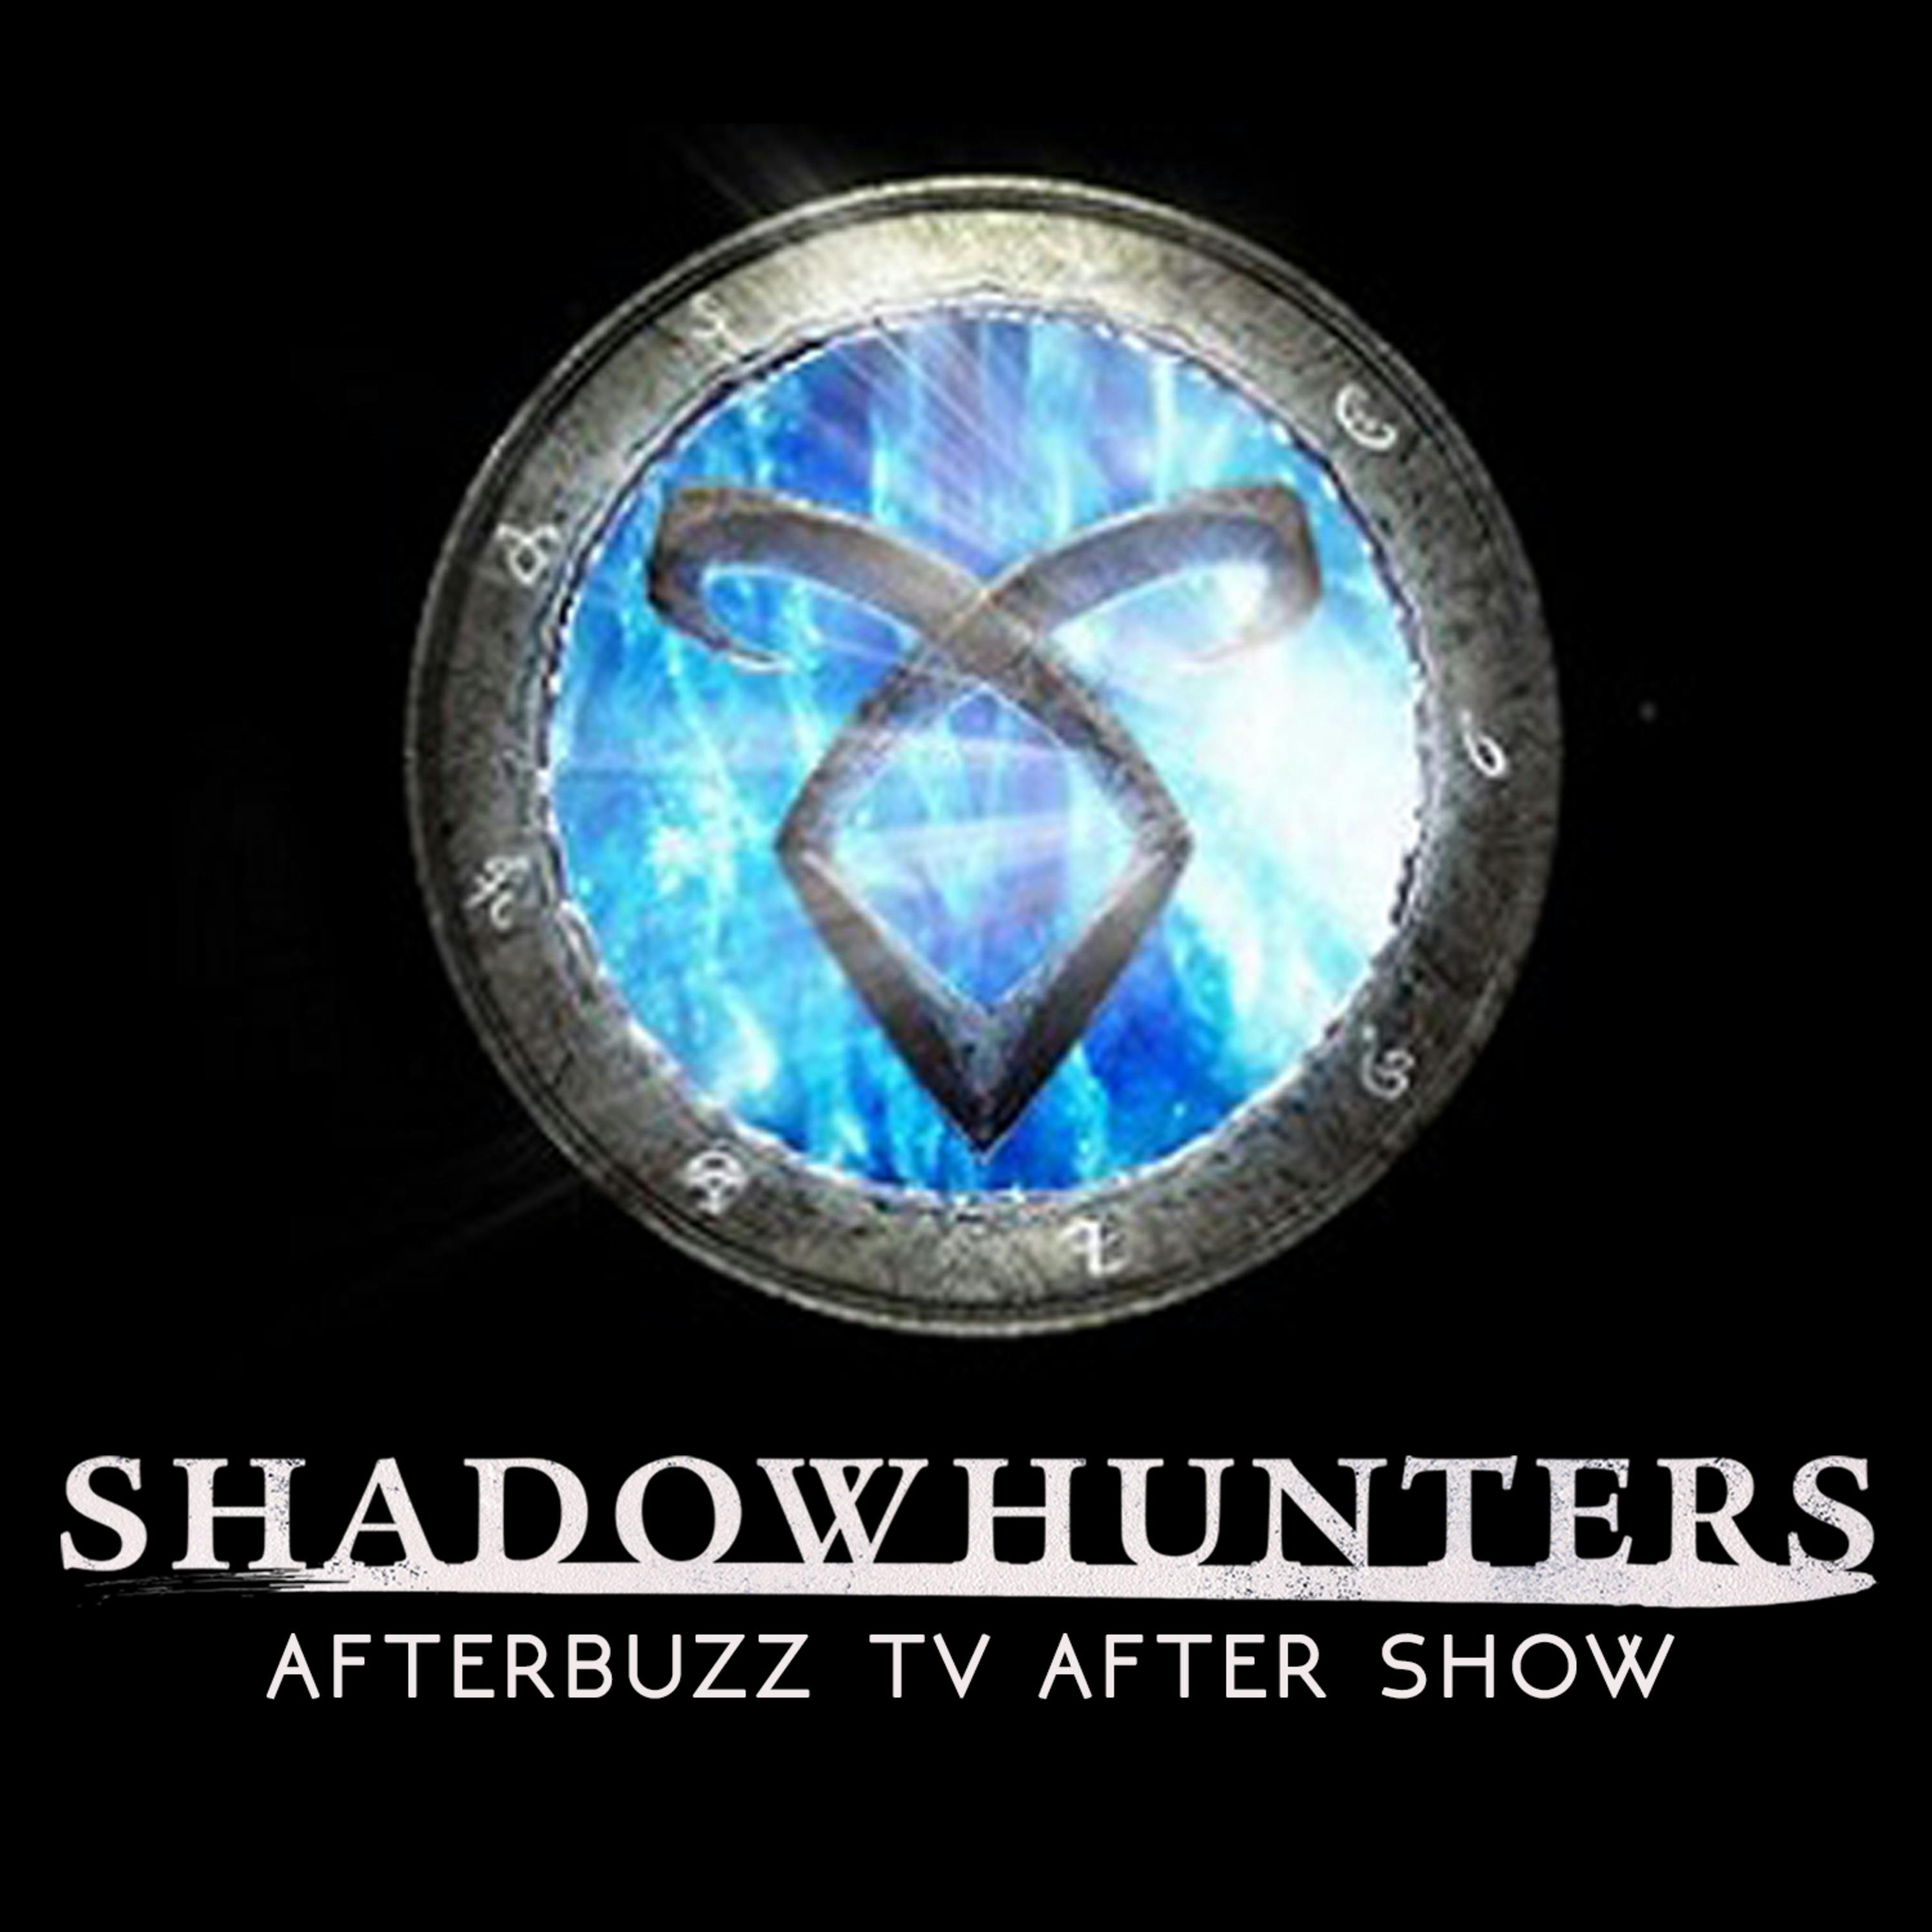 Luke Baines Guests on “Stay With Me” Season 3 Episode 16 ’Shadowhunters’ Review